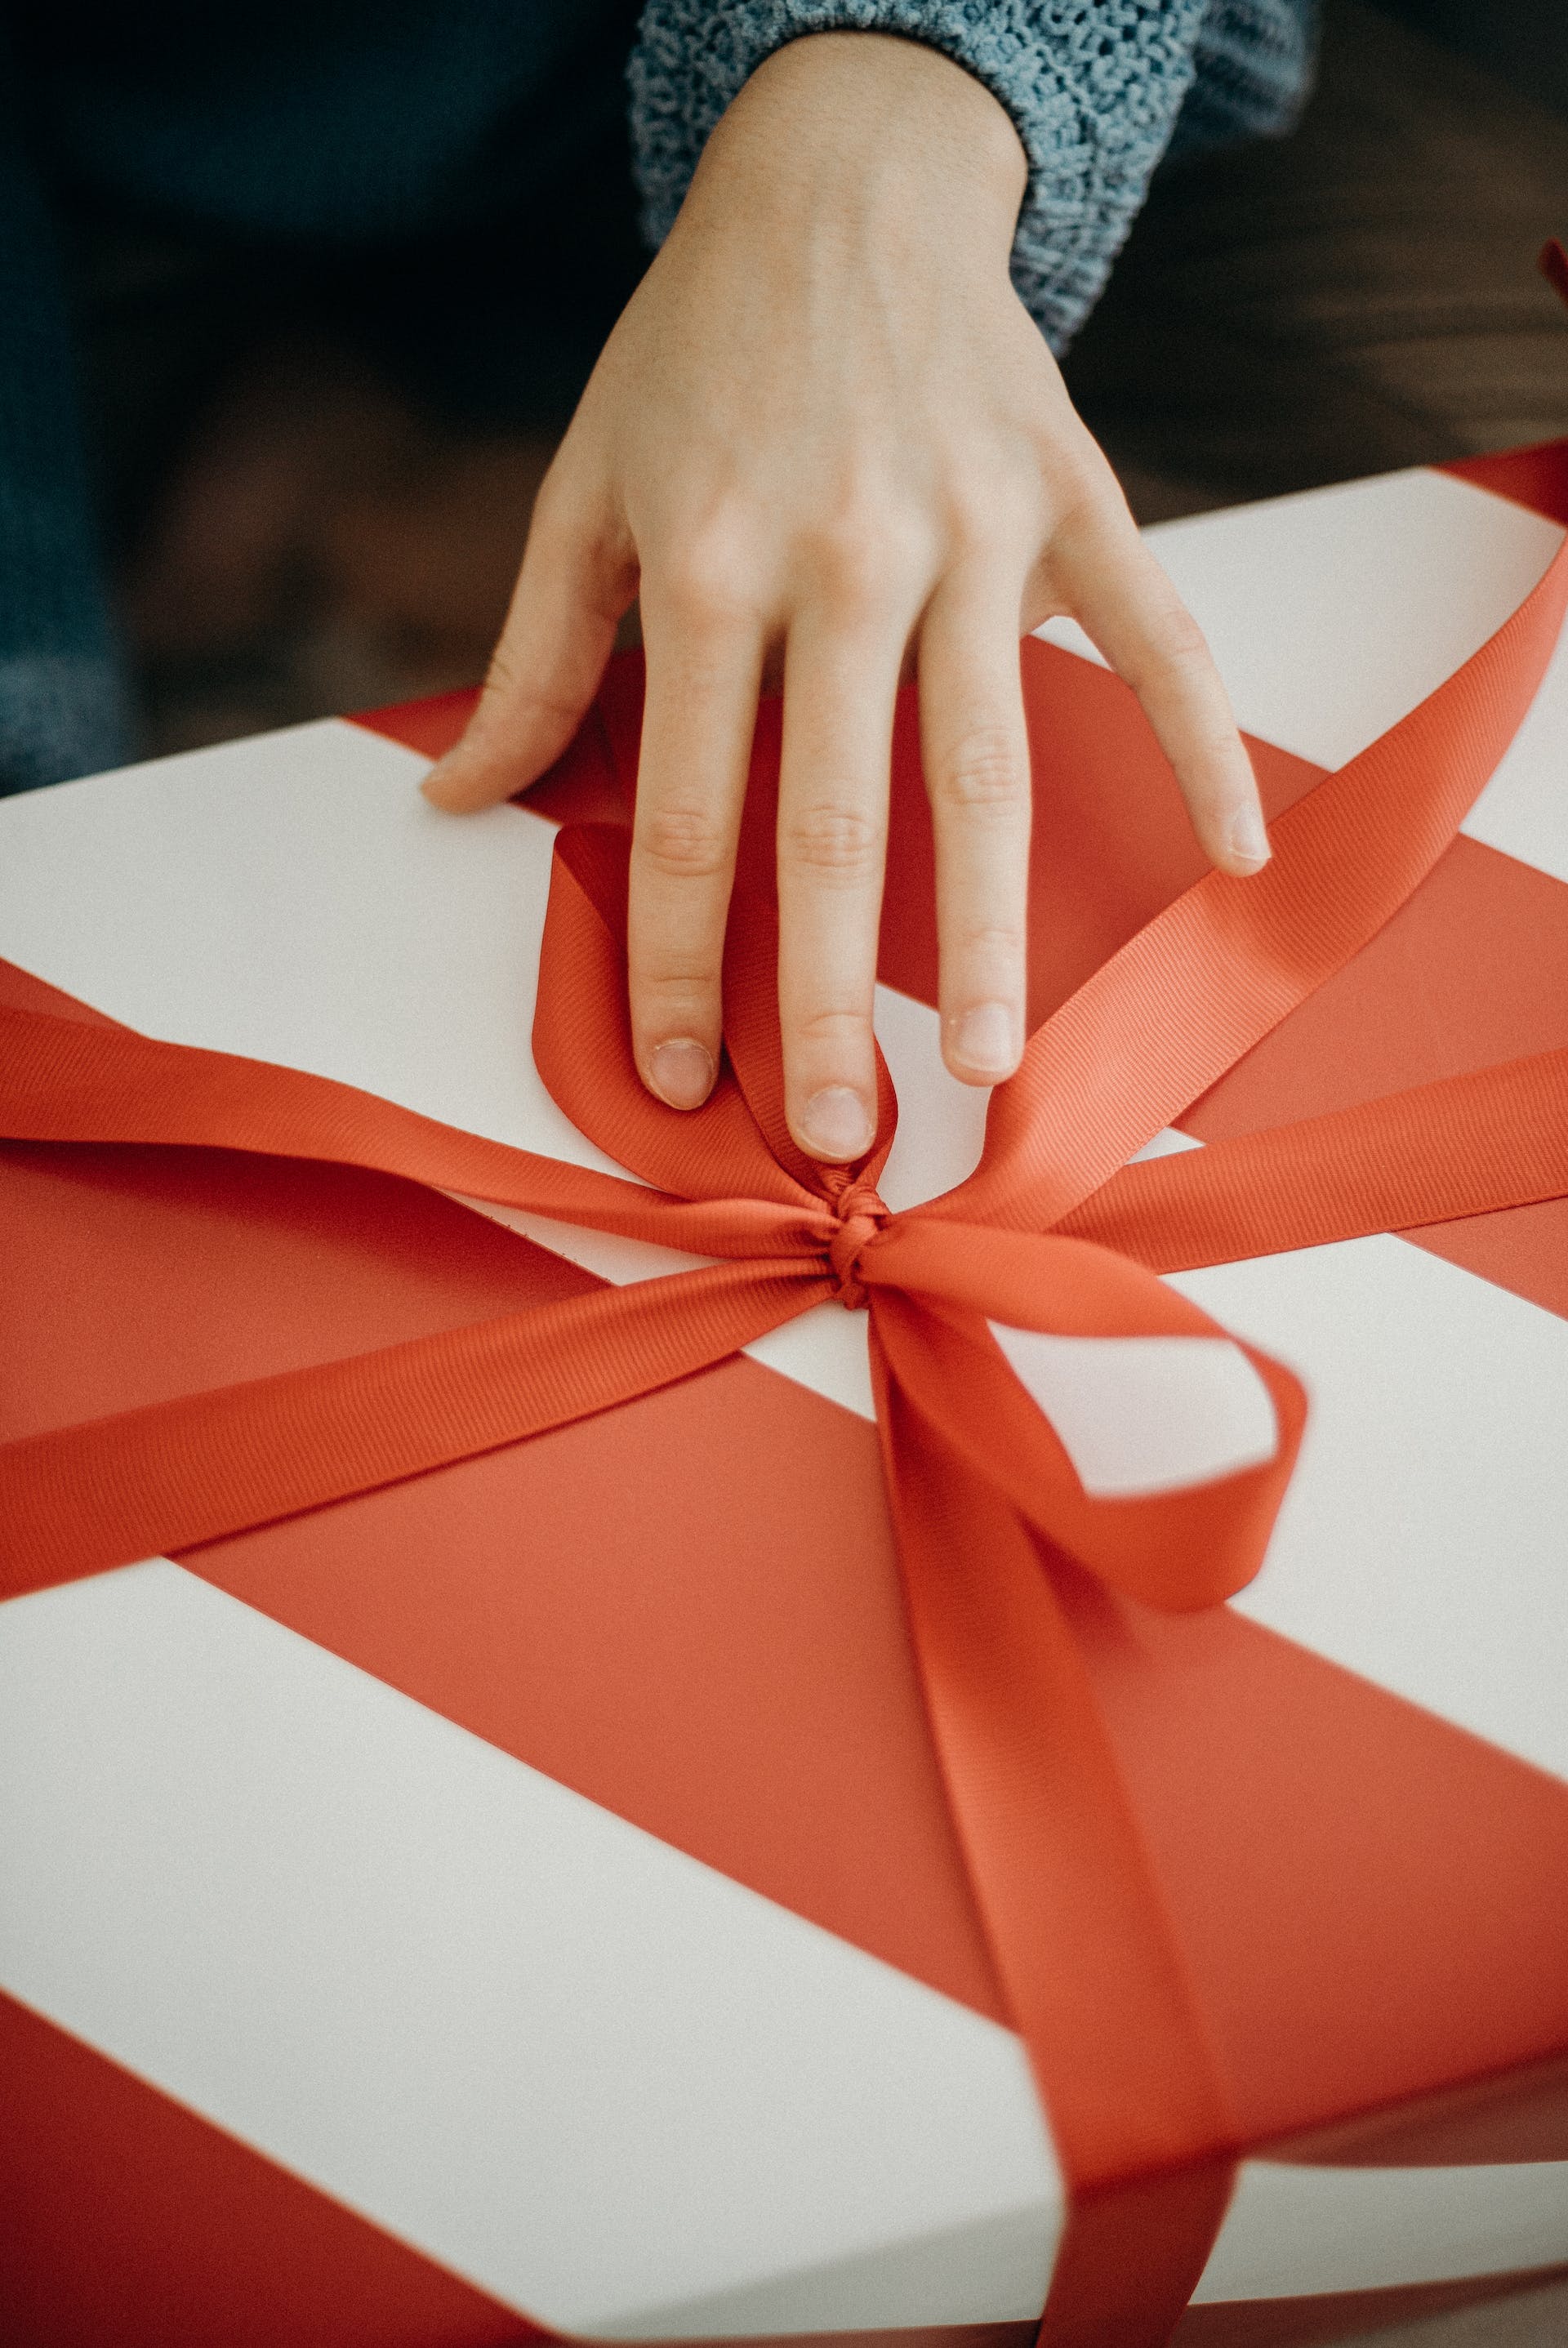 A woman touching a gift | Source: Pexels